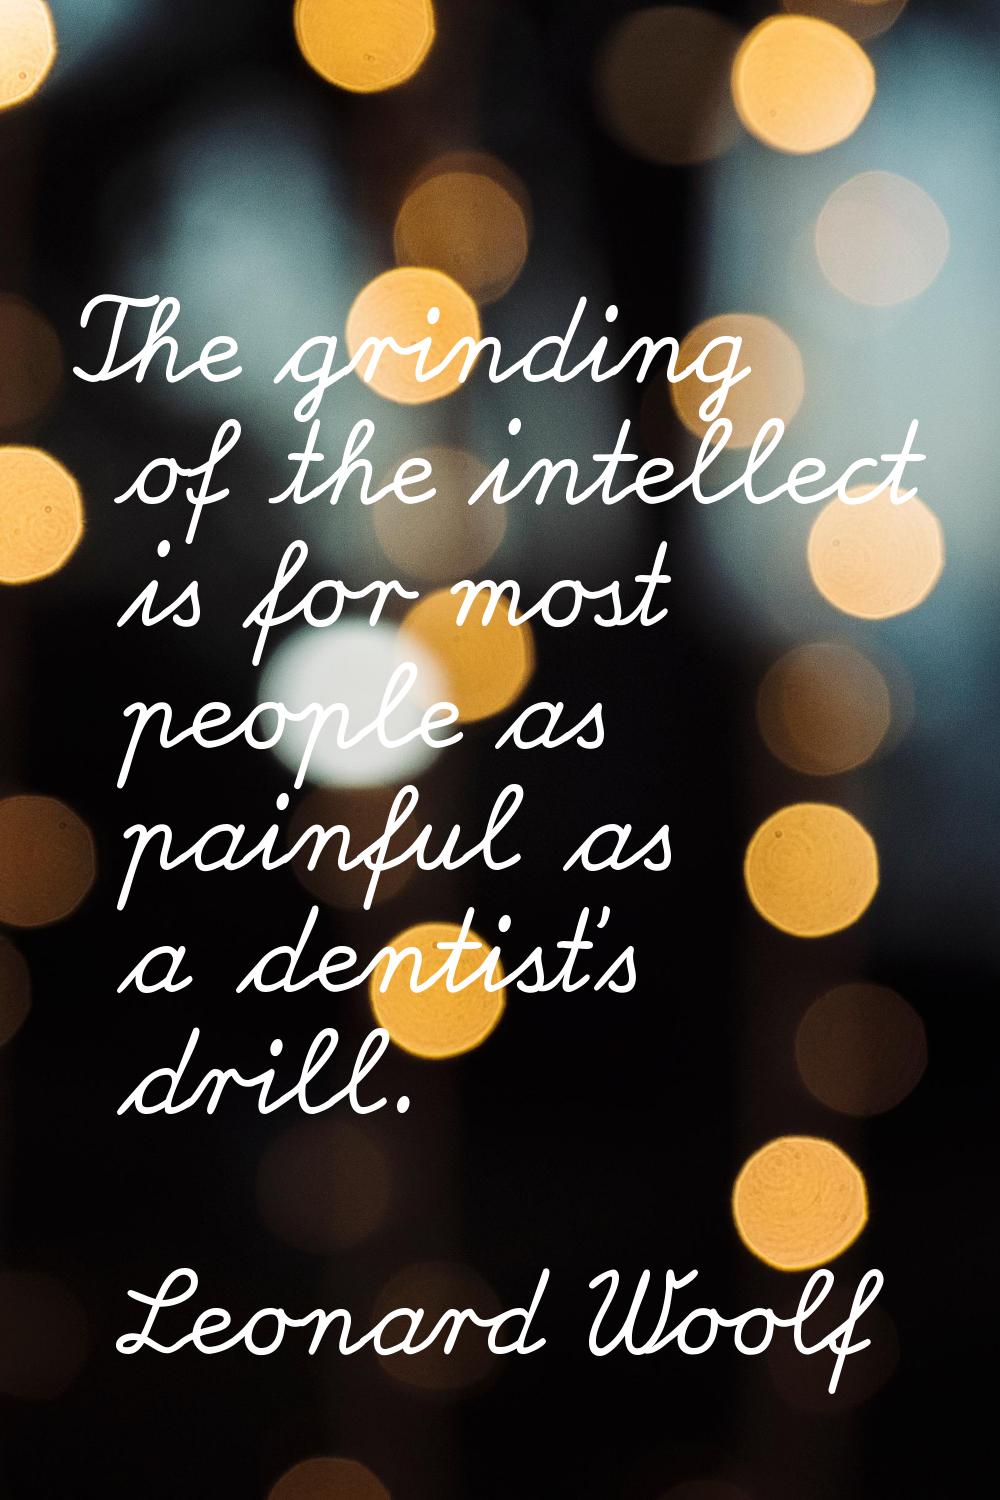 The grinding of the intellect is for most people as painful as a dentist's drill.